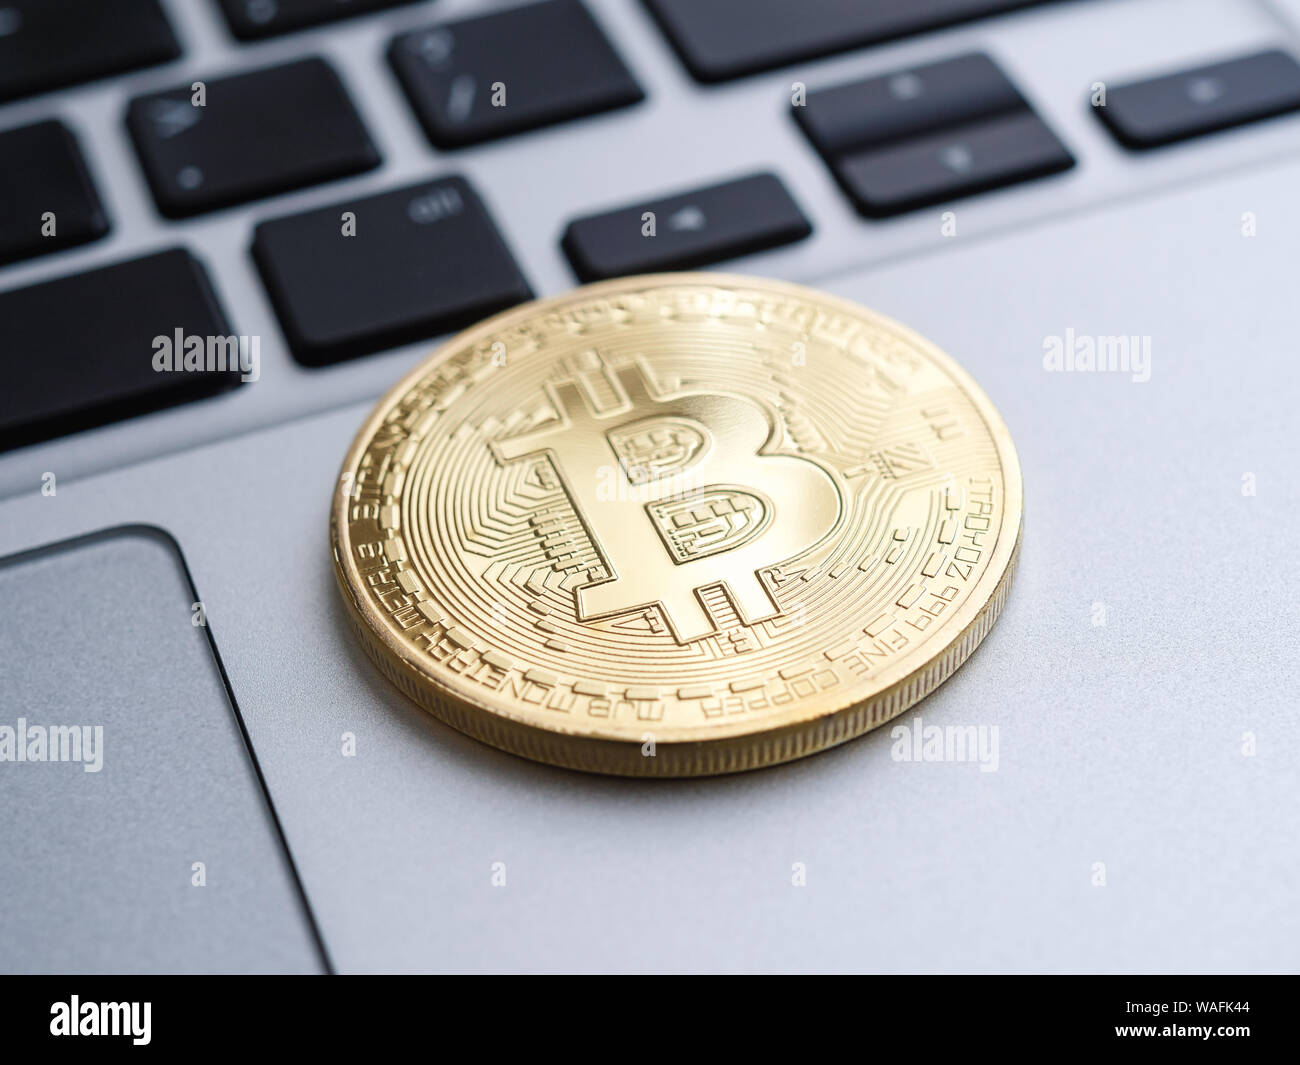 Golden bitcoin coin on laptop, shallow depth of field Stock Photo